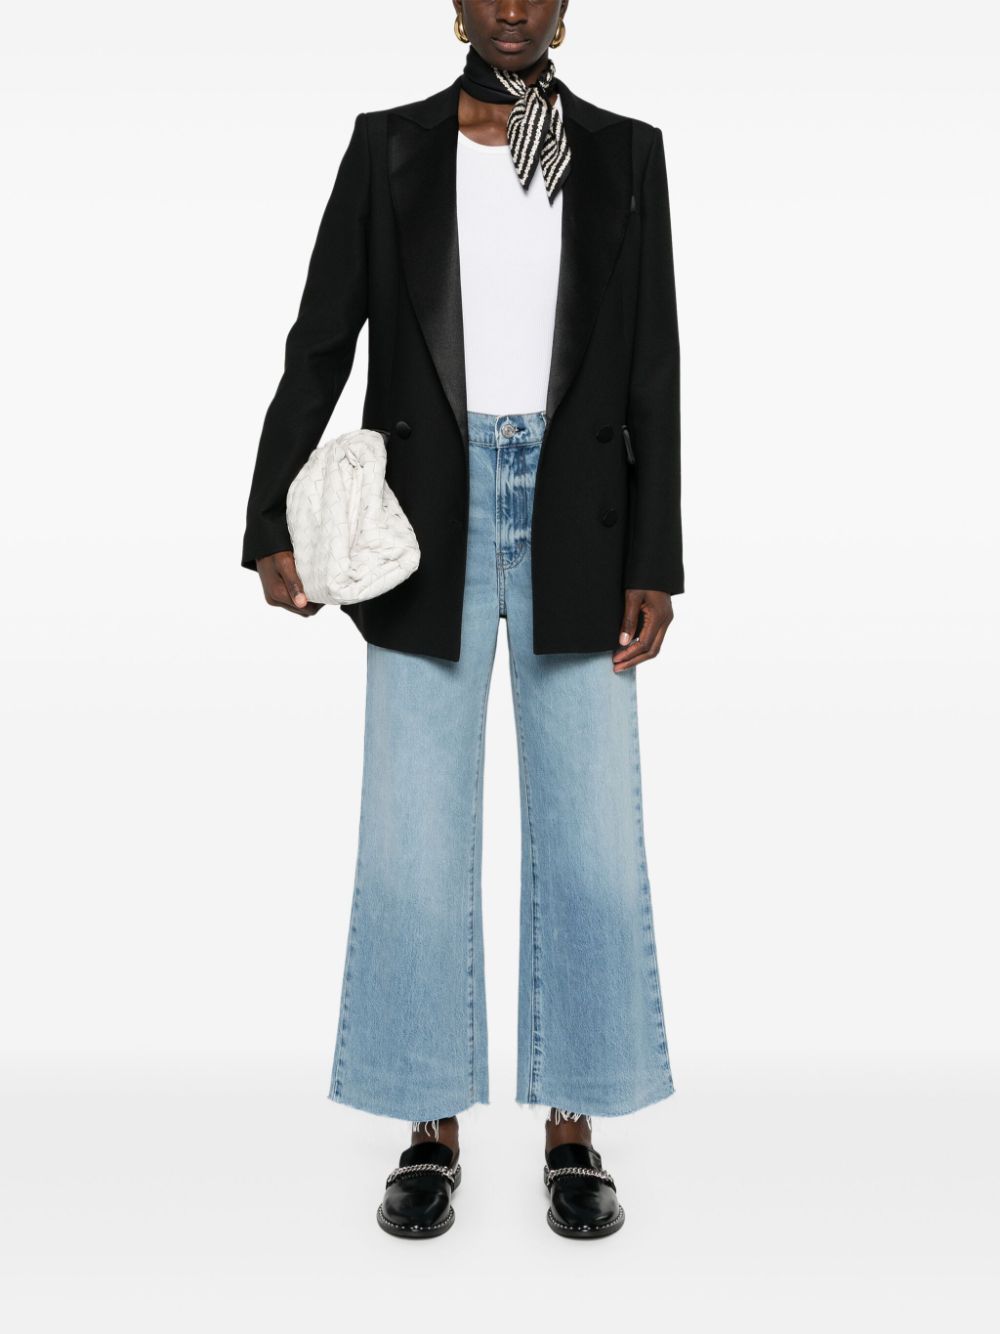 FRAME The Relaxed Straight jeans - Blauw